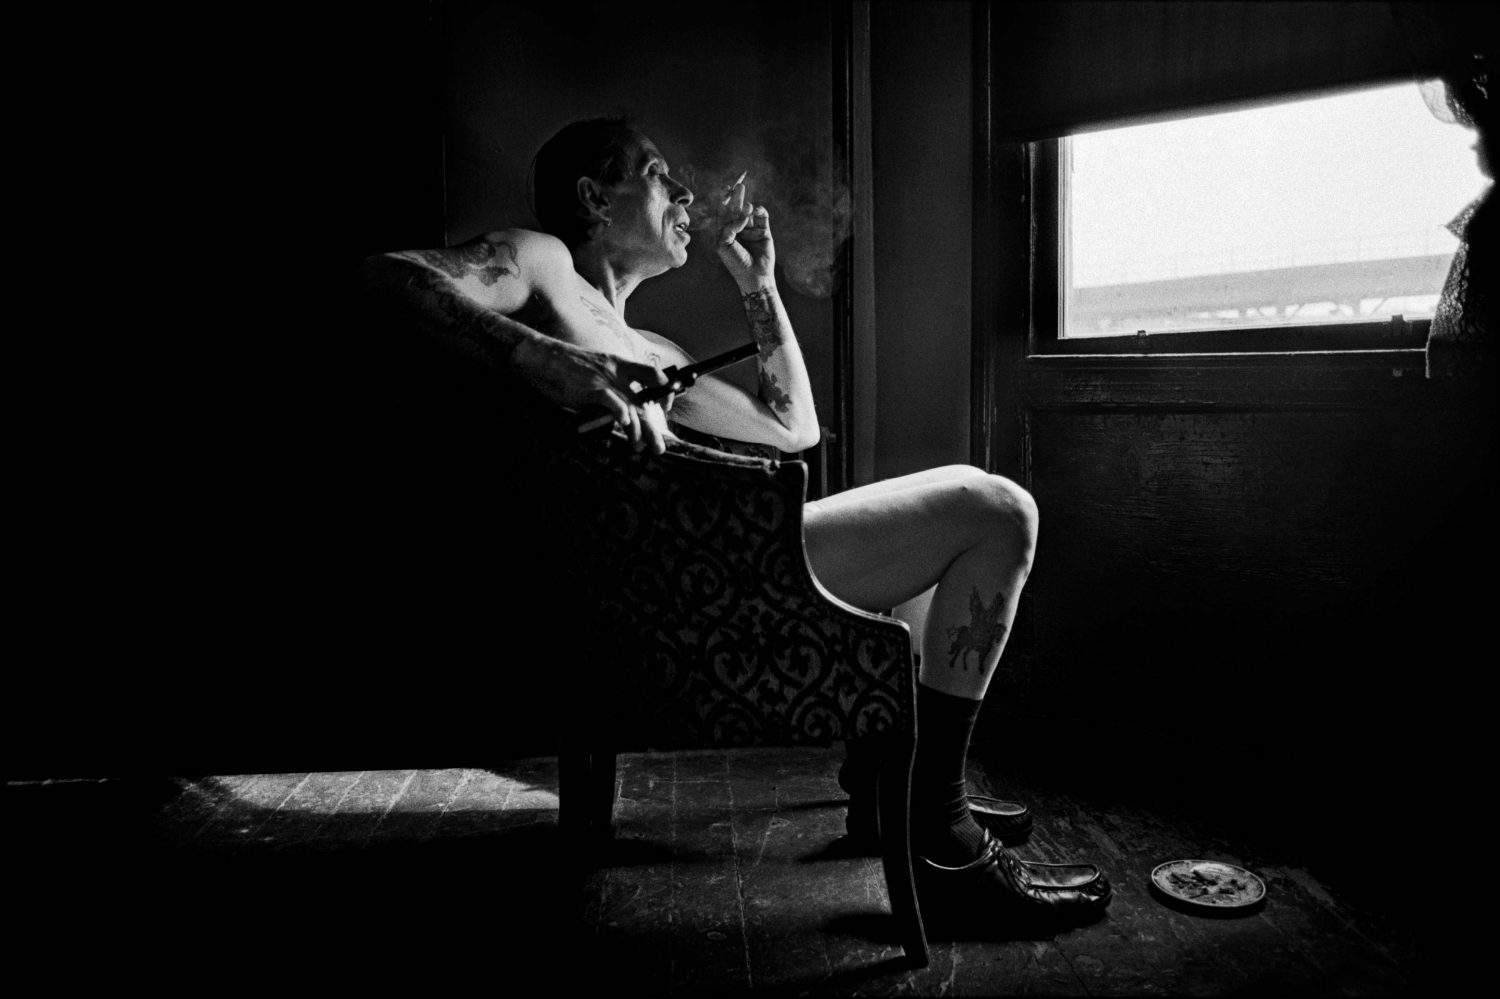 thumbnail of Uncle Charlie contemplating in his living room the reality that his son Joe is dying from HIV, sitting by the window holding his newest and latest handgun in his apartment in Bushwick, Brooklyn in 1996.